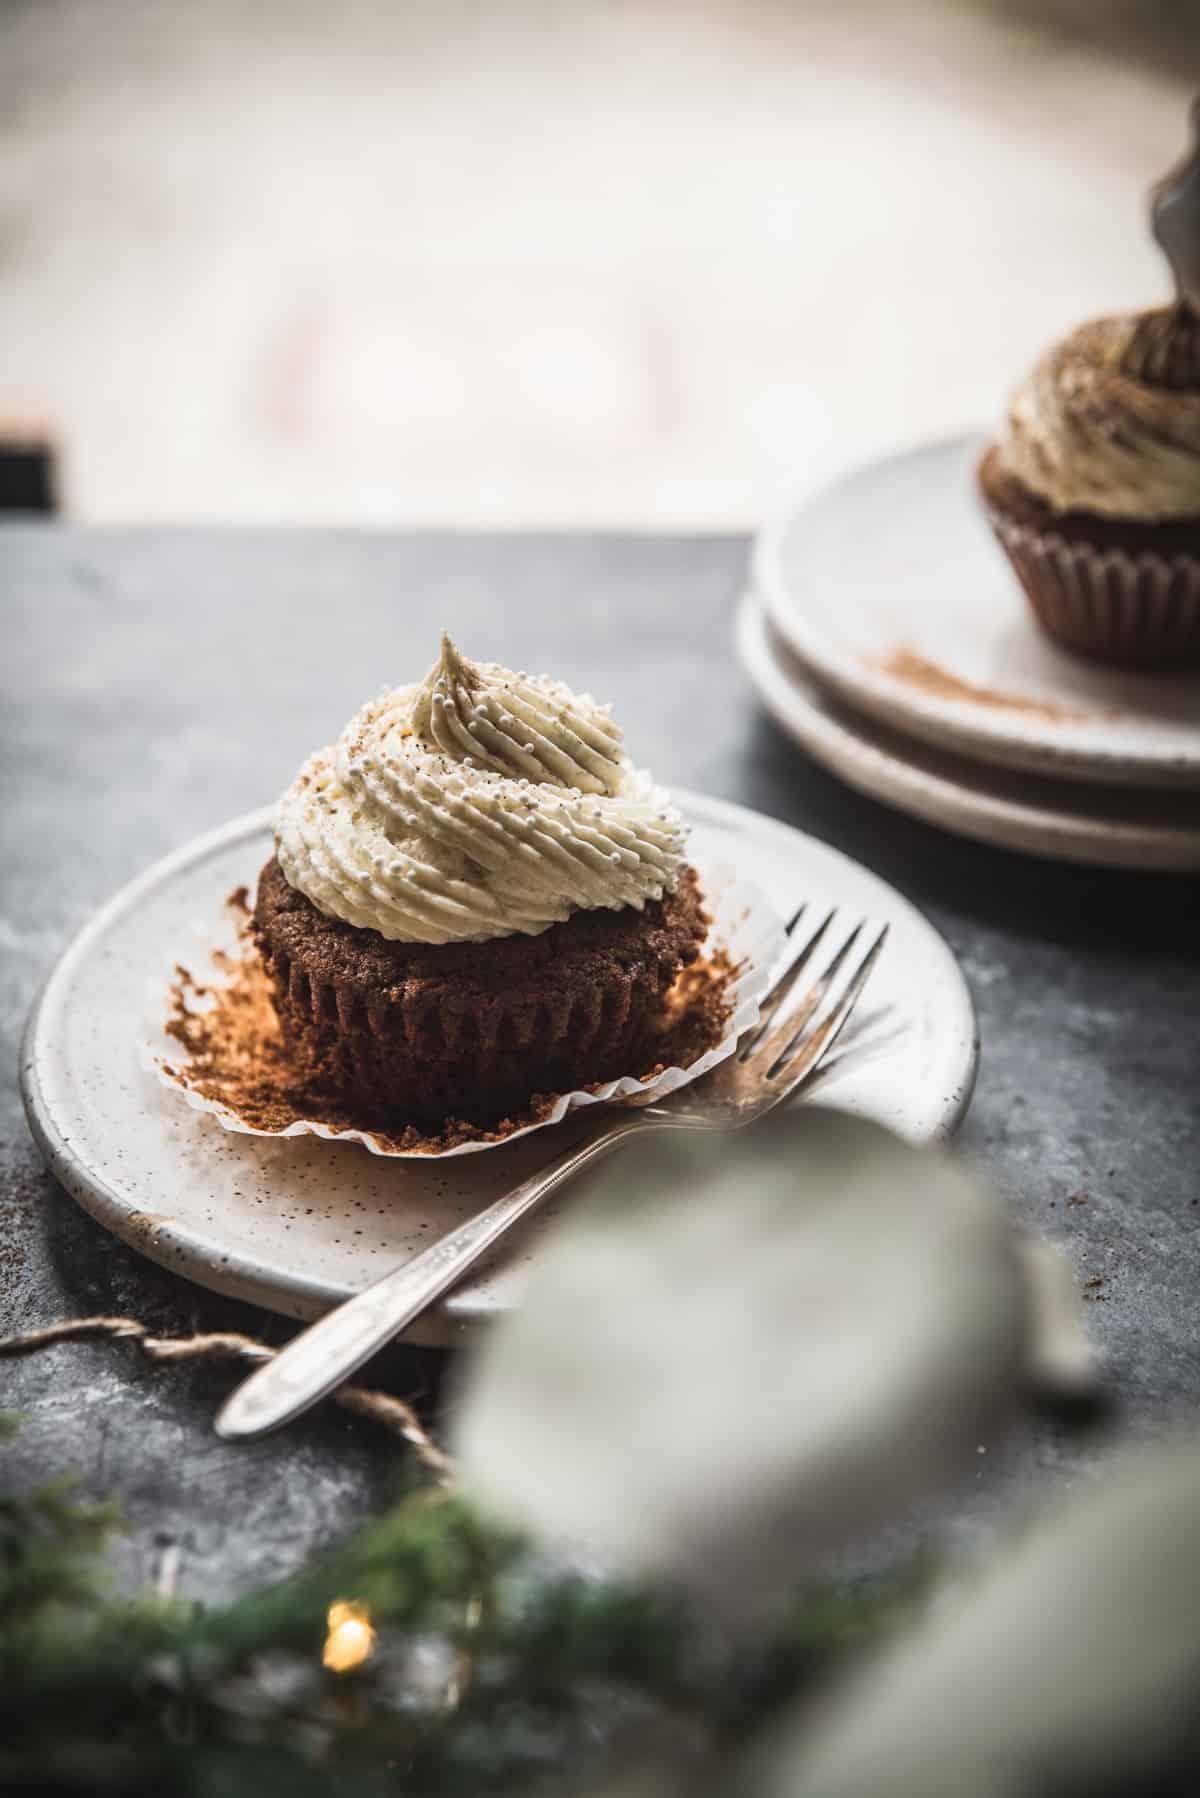 backlit photo of a cupcake on a plate with a fork